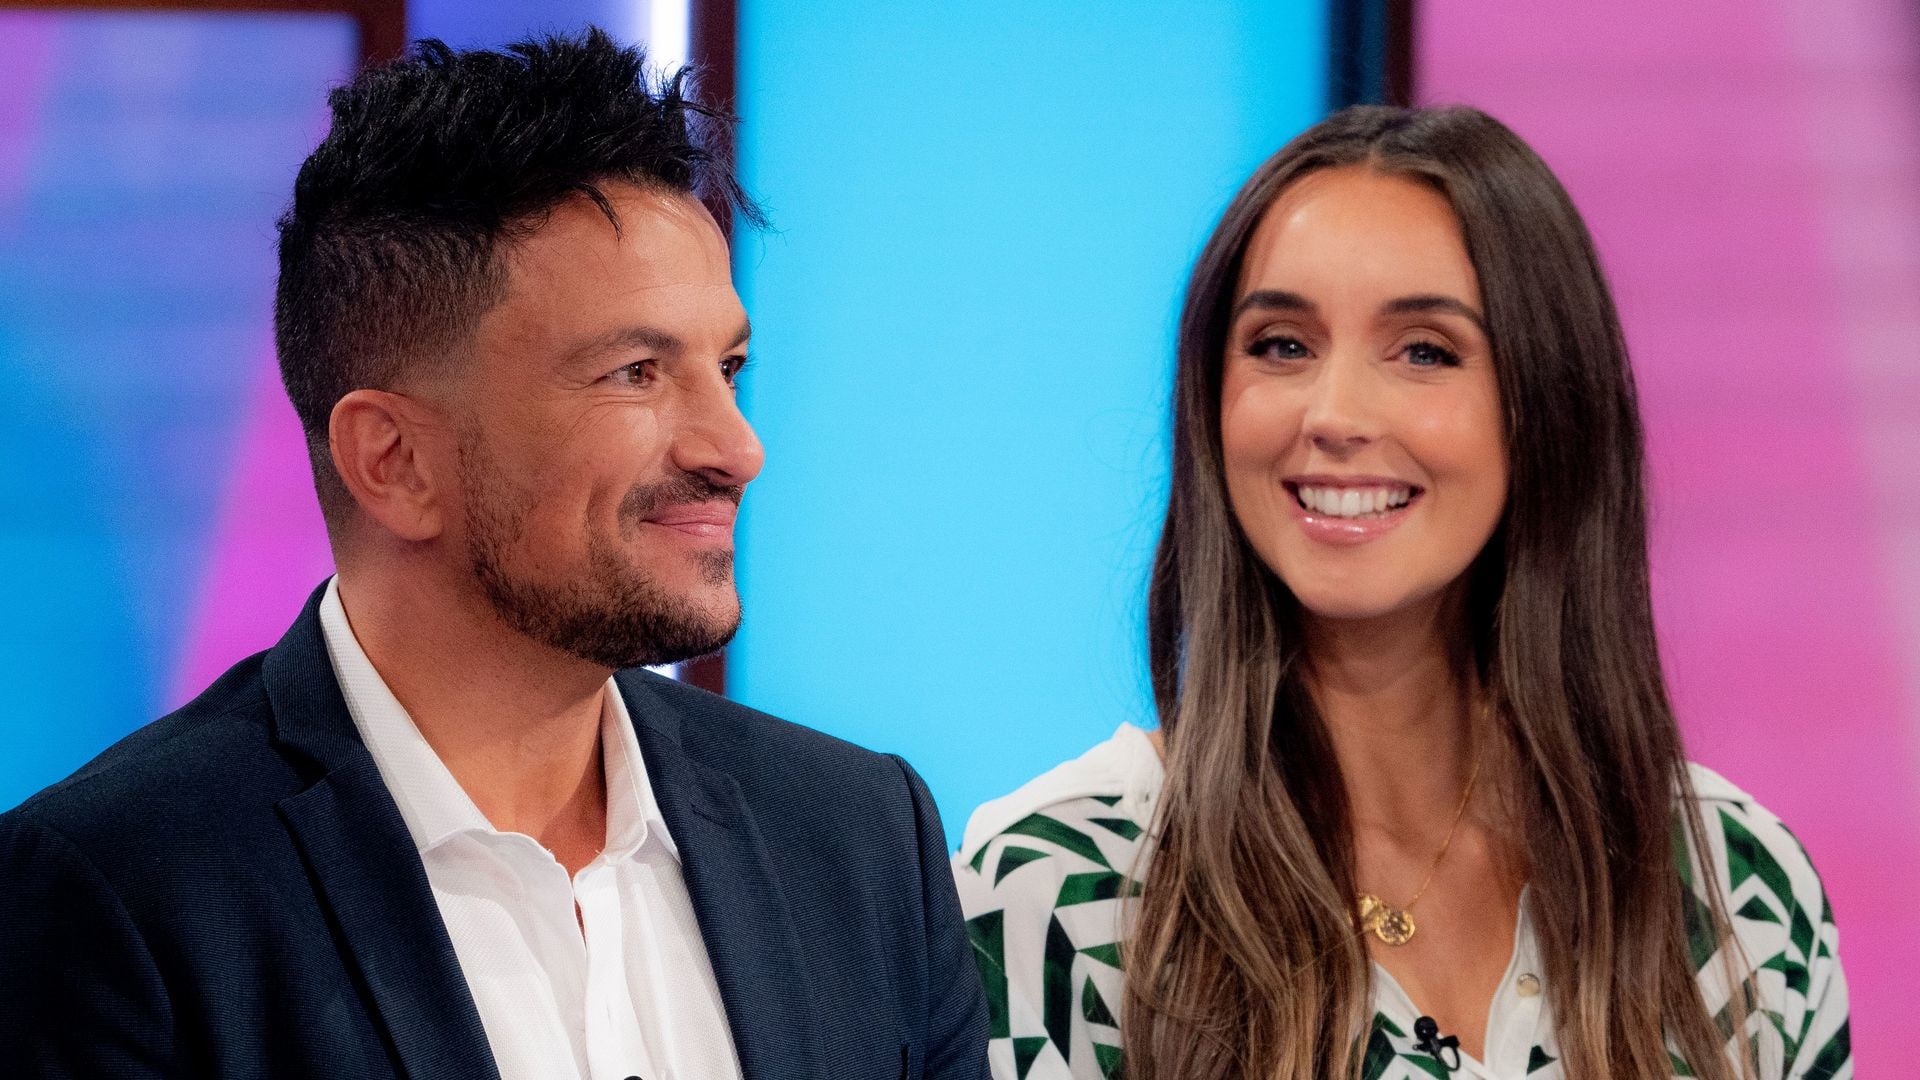 Peter Andre reveals baby names for newborn daughter that are top of his list - but not wife Emily's